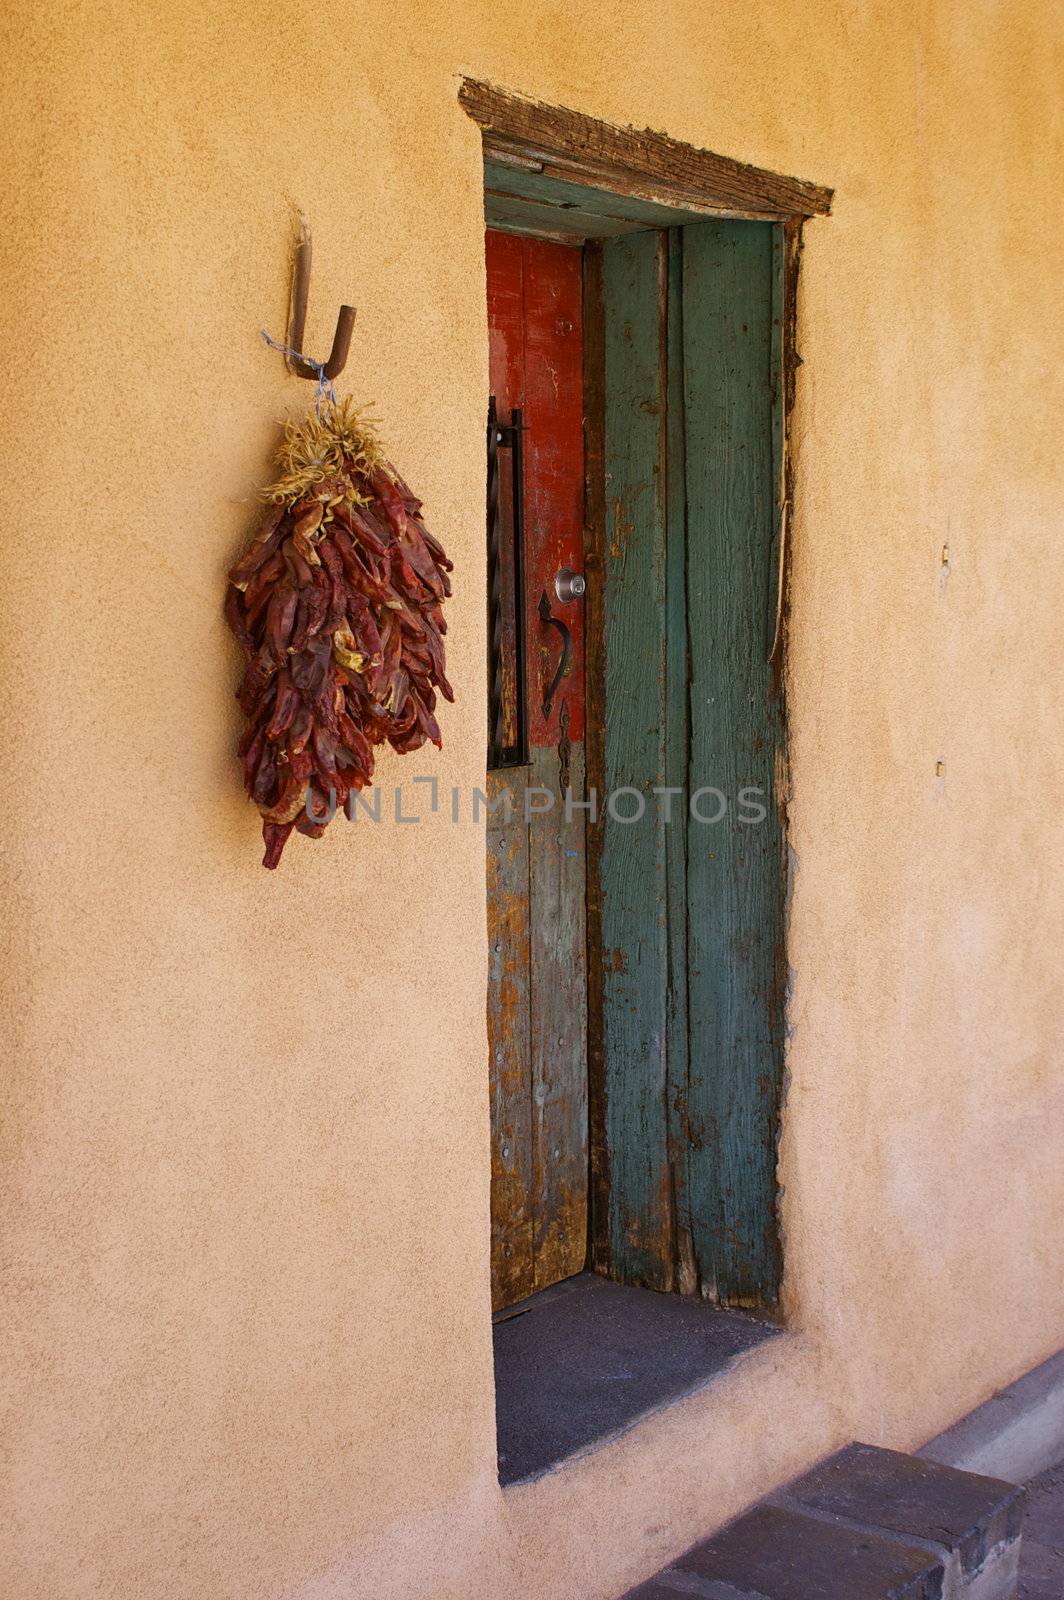 New Mexican Adobe Building, featuring a characterful doorway and chilli peppers hanging on the wall, with copy space.